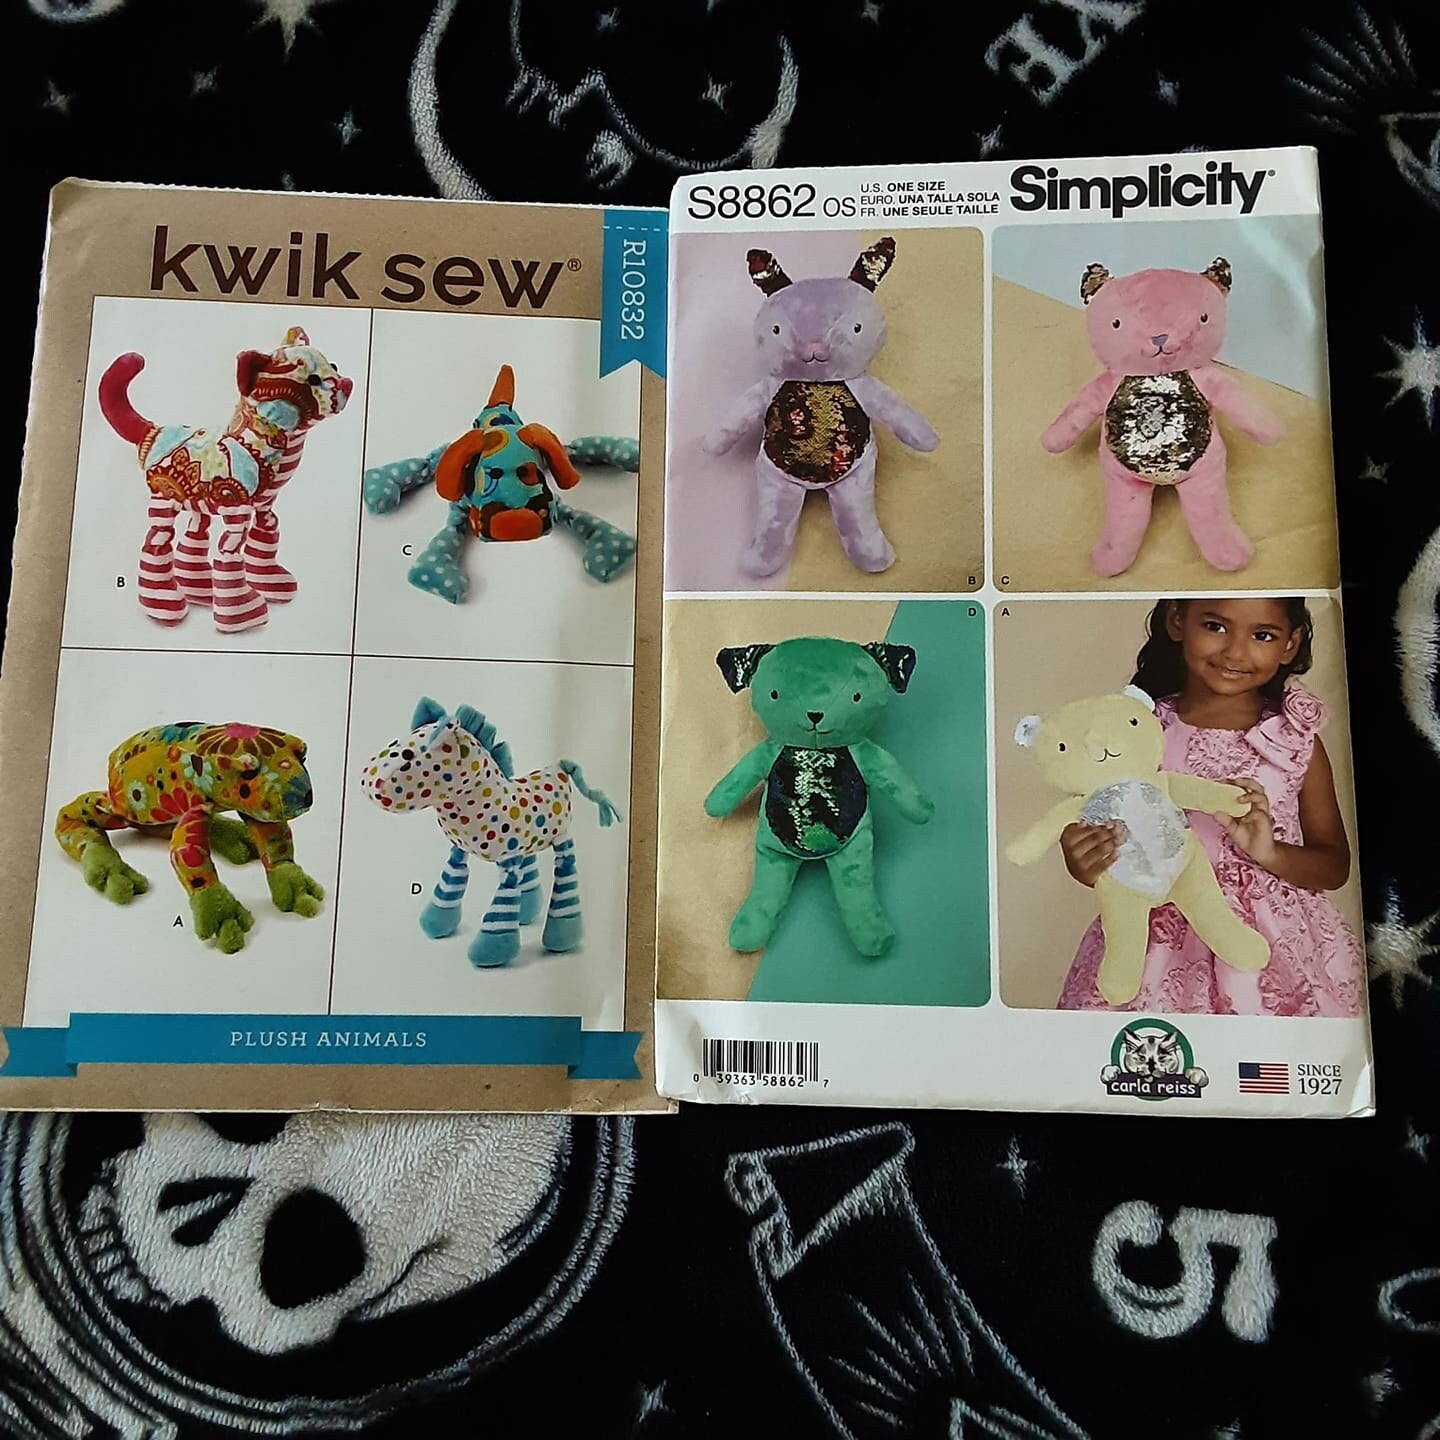 Stuffed Animal Sewing Pattern Set- Discontinued brand kwik sew r10832 and Simplicity 8862